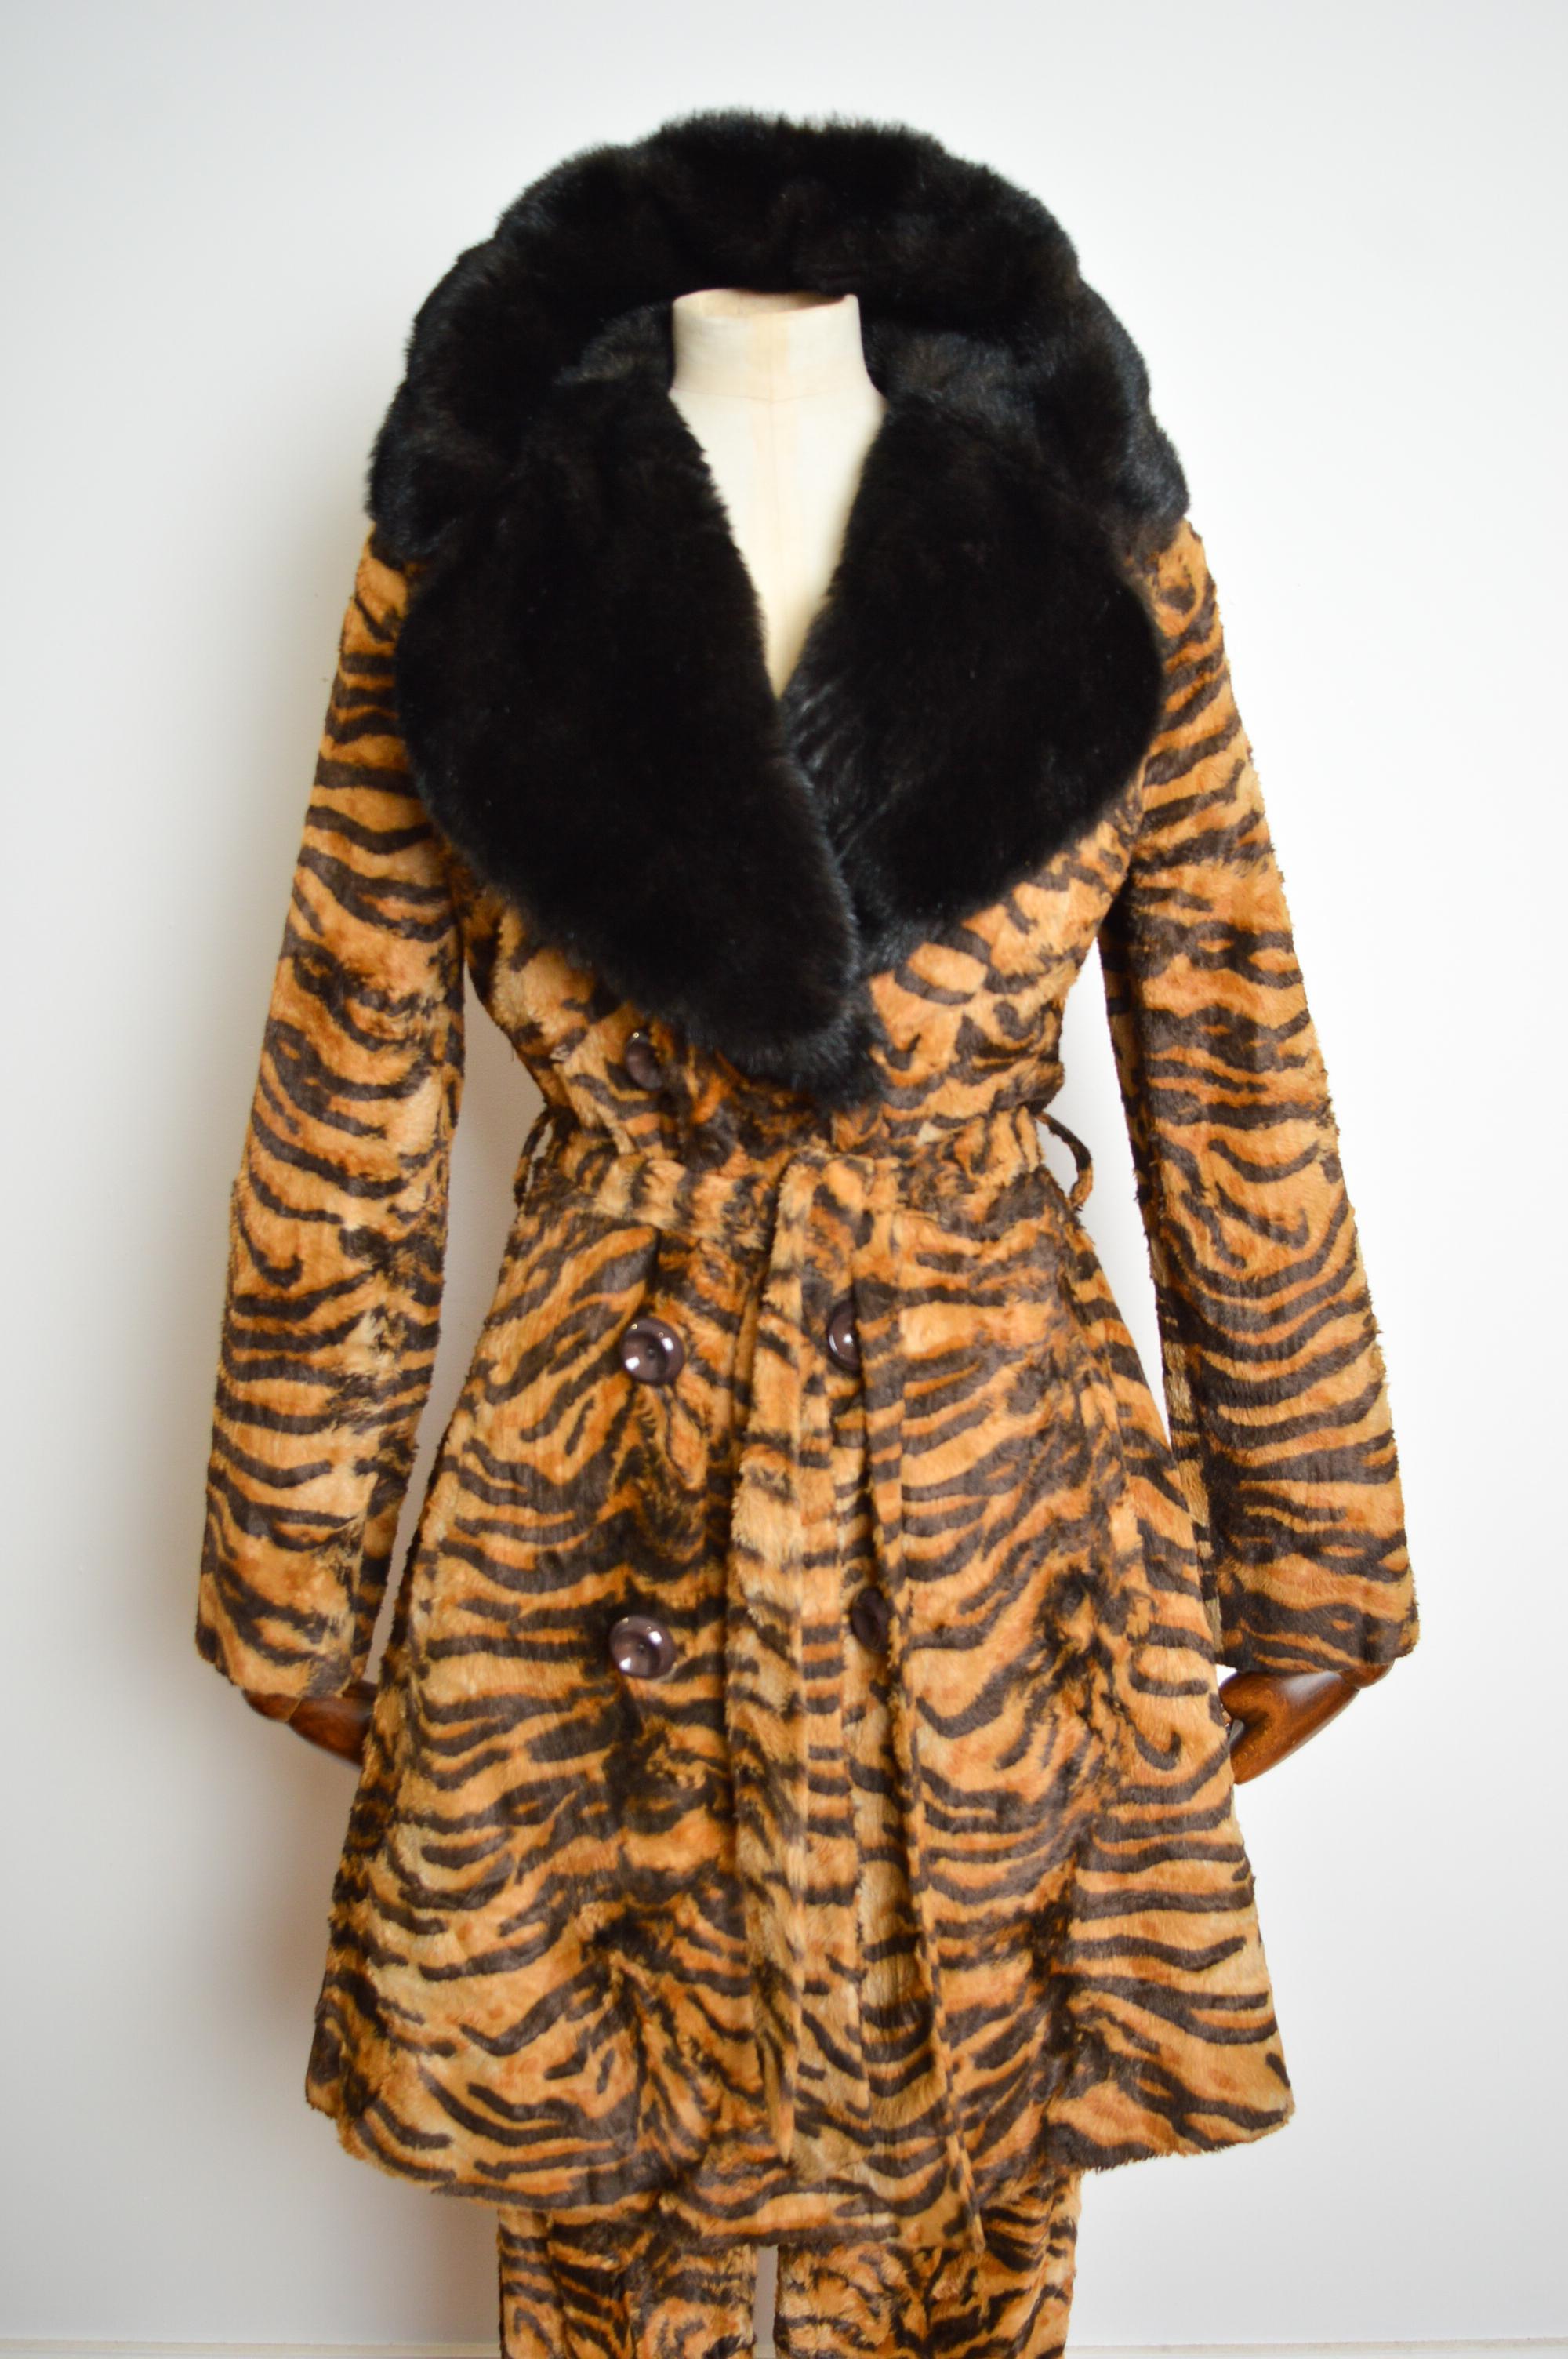 Early 1990's DOLCE & GABBANA Tiger Print Faux Fur Jacket Pants Suit Matching Set For Sale 5